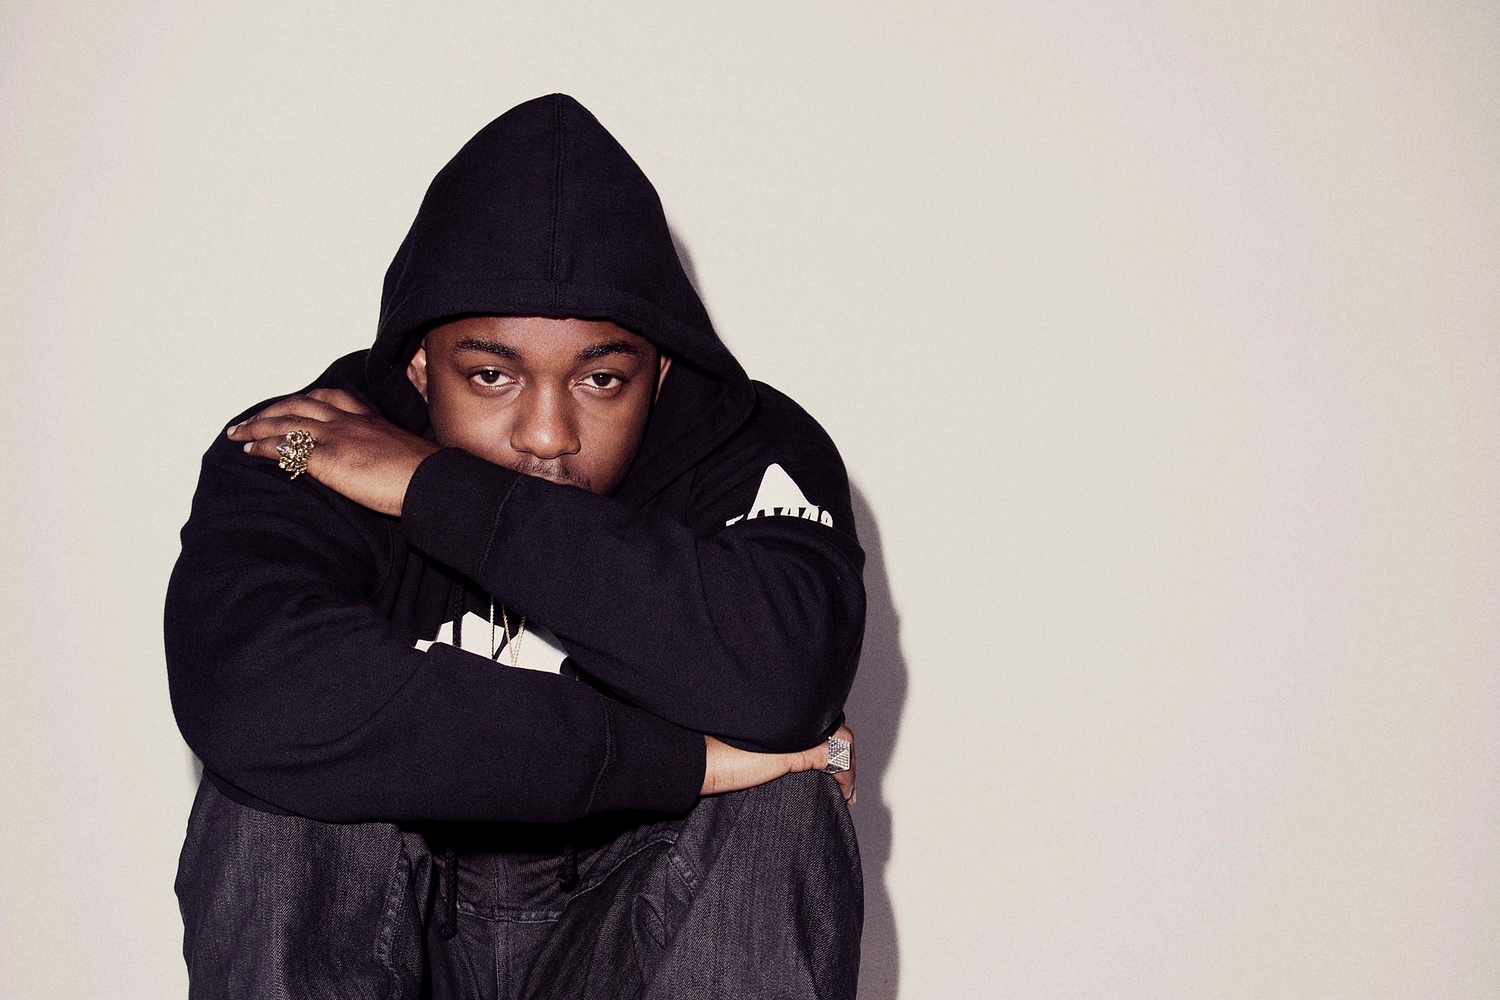 Kendrick Lamar’s ‘All Day’ remix surfaces online